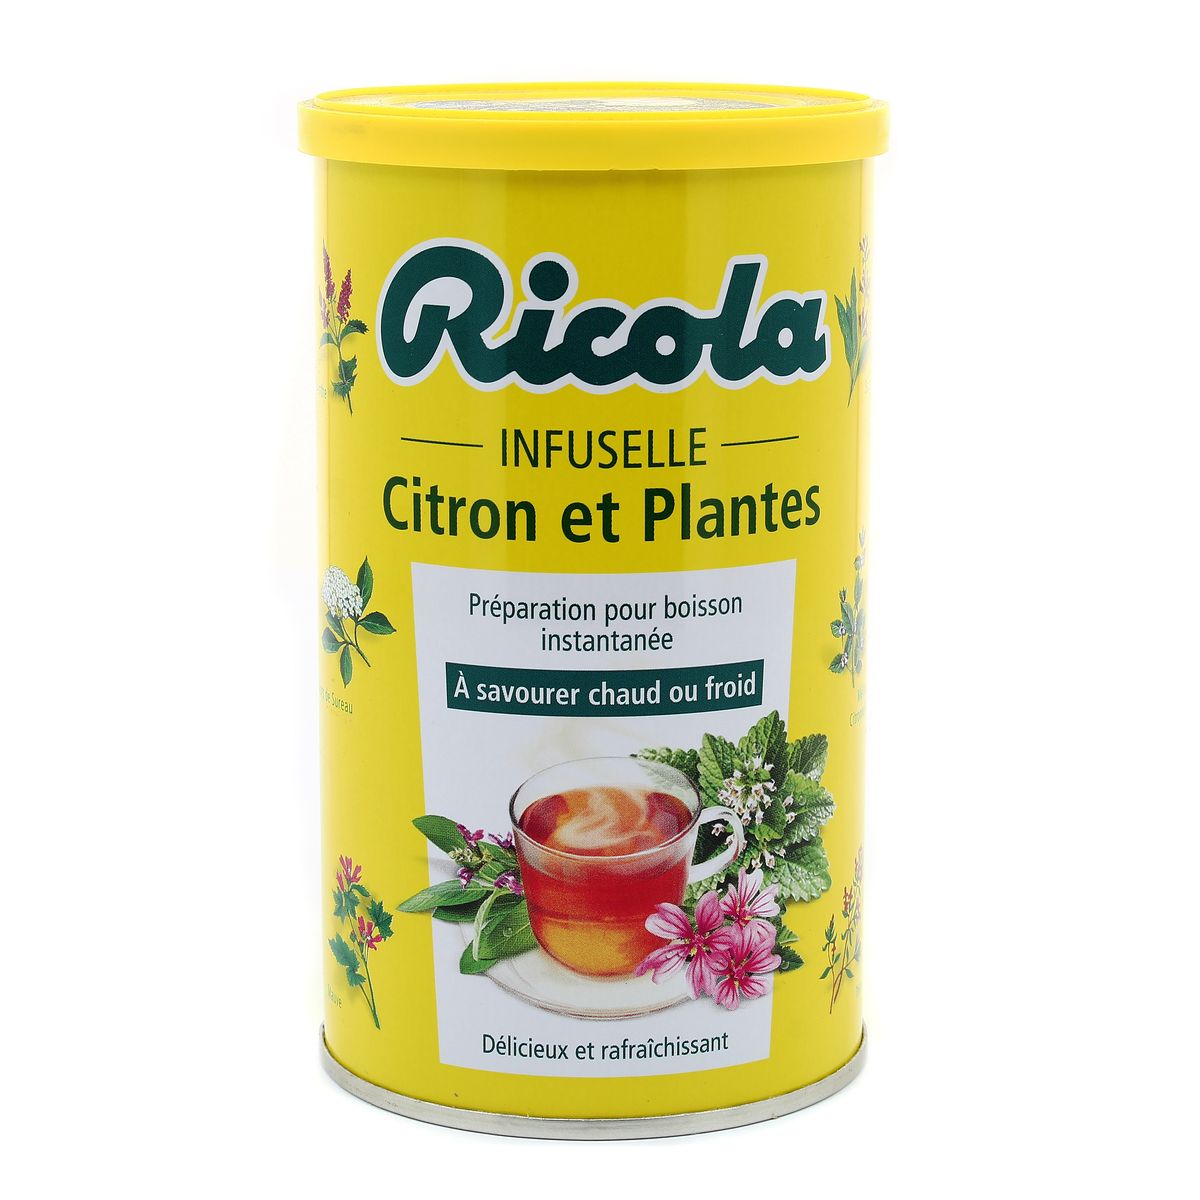 Infusion instantanee aux herbes - Ricola - 200g